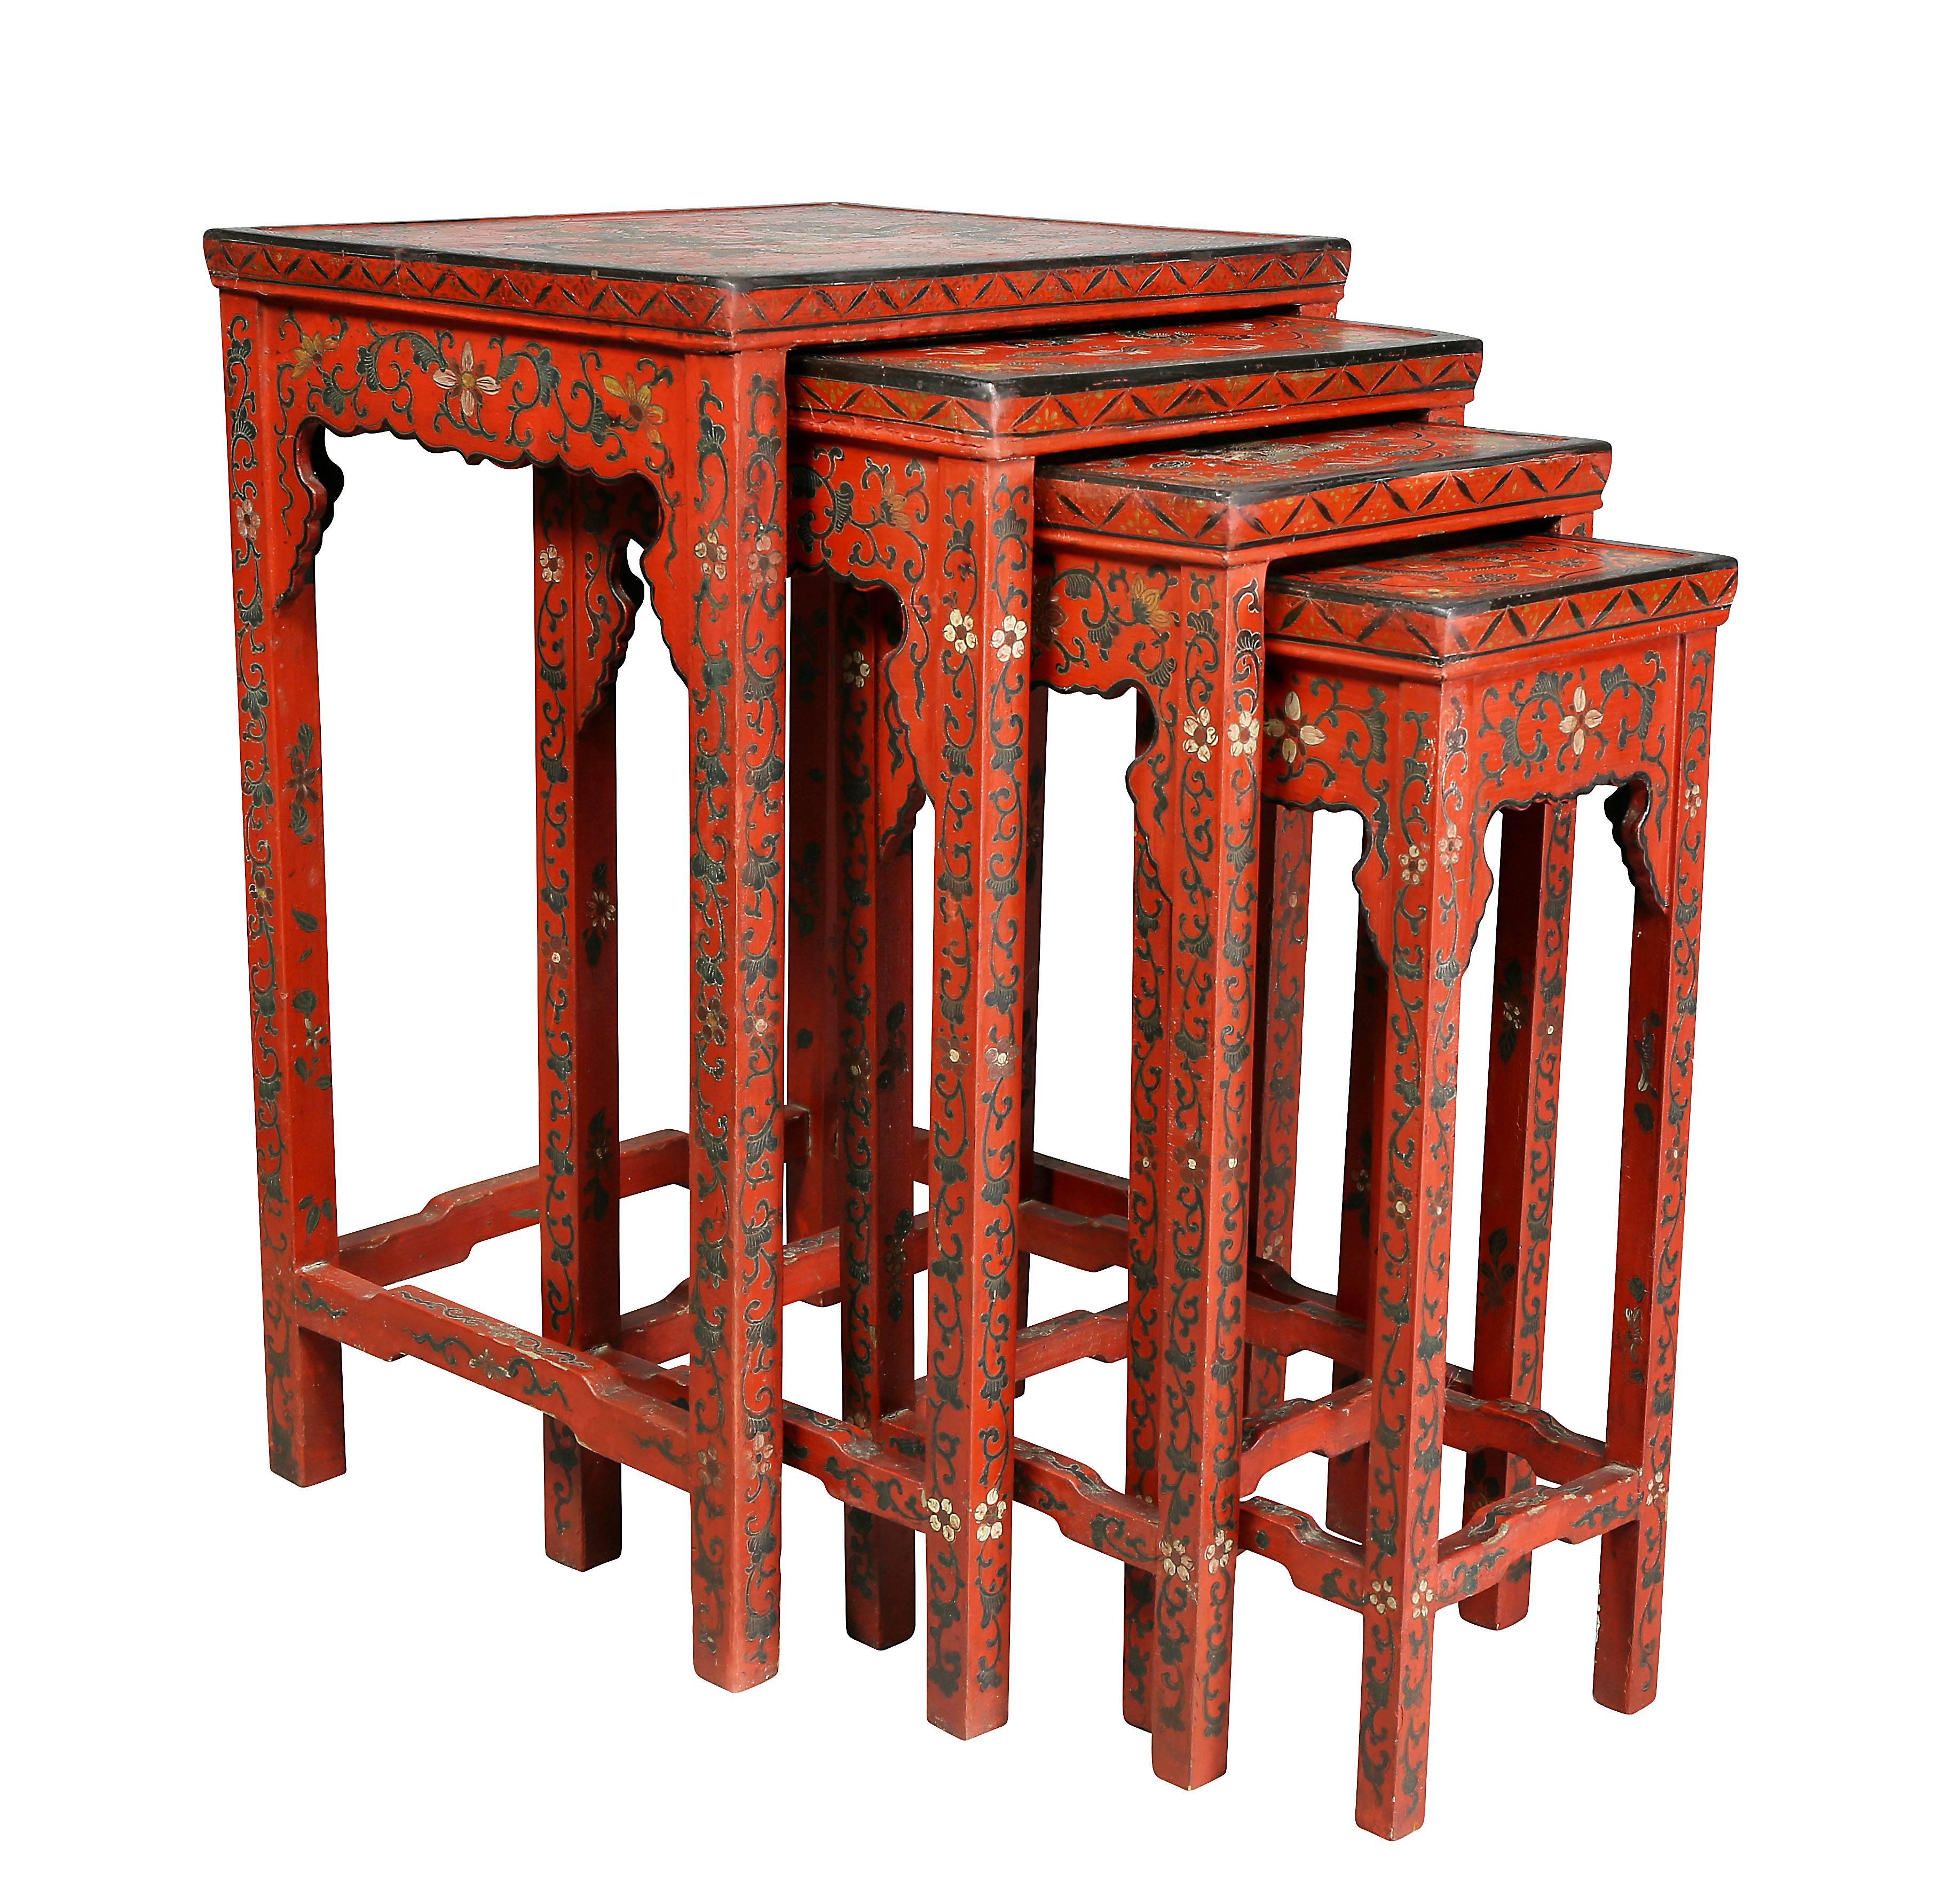 Nest of Four Chinese Red Lacquered Tables